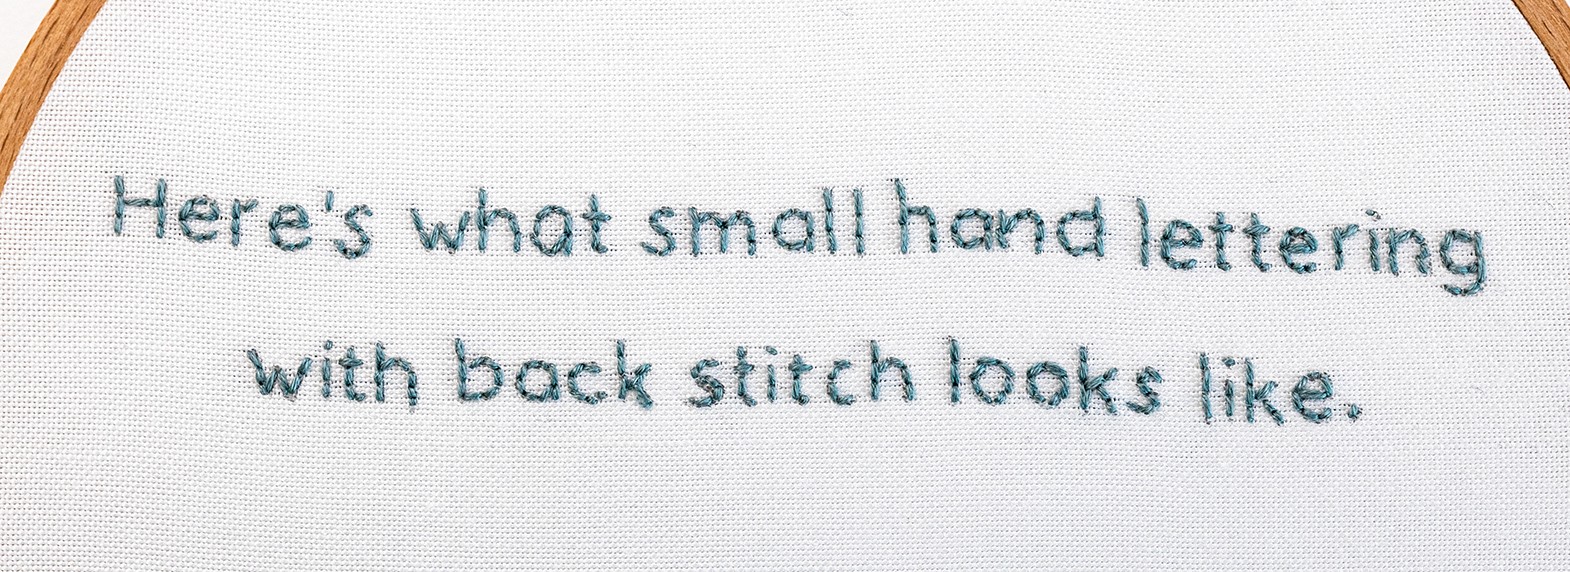 This is an image of the word 'Piper' stitched with back stitch.